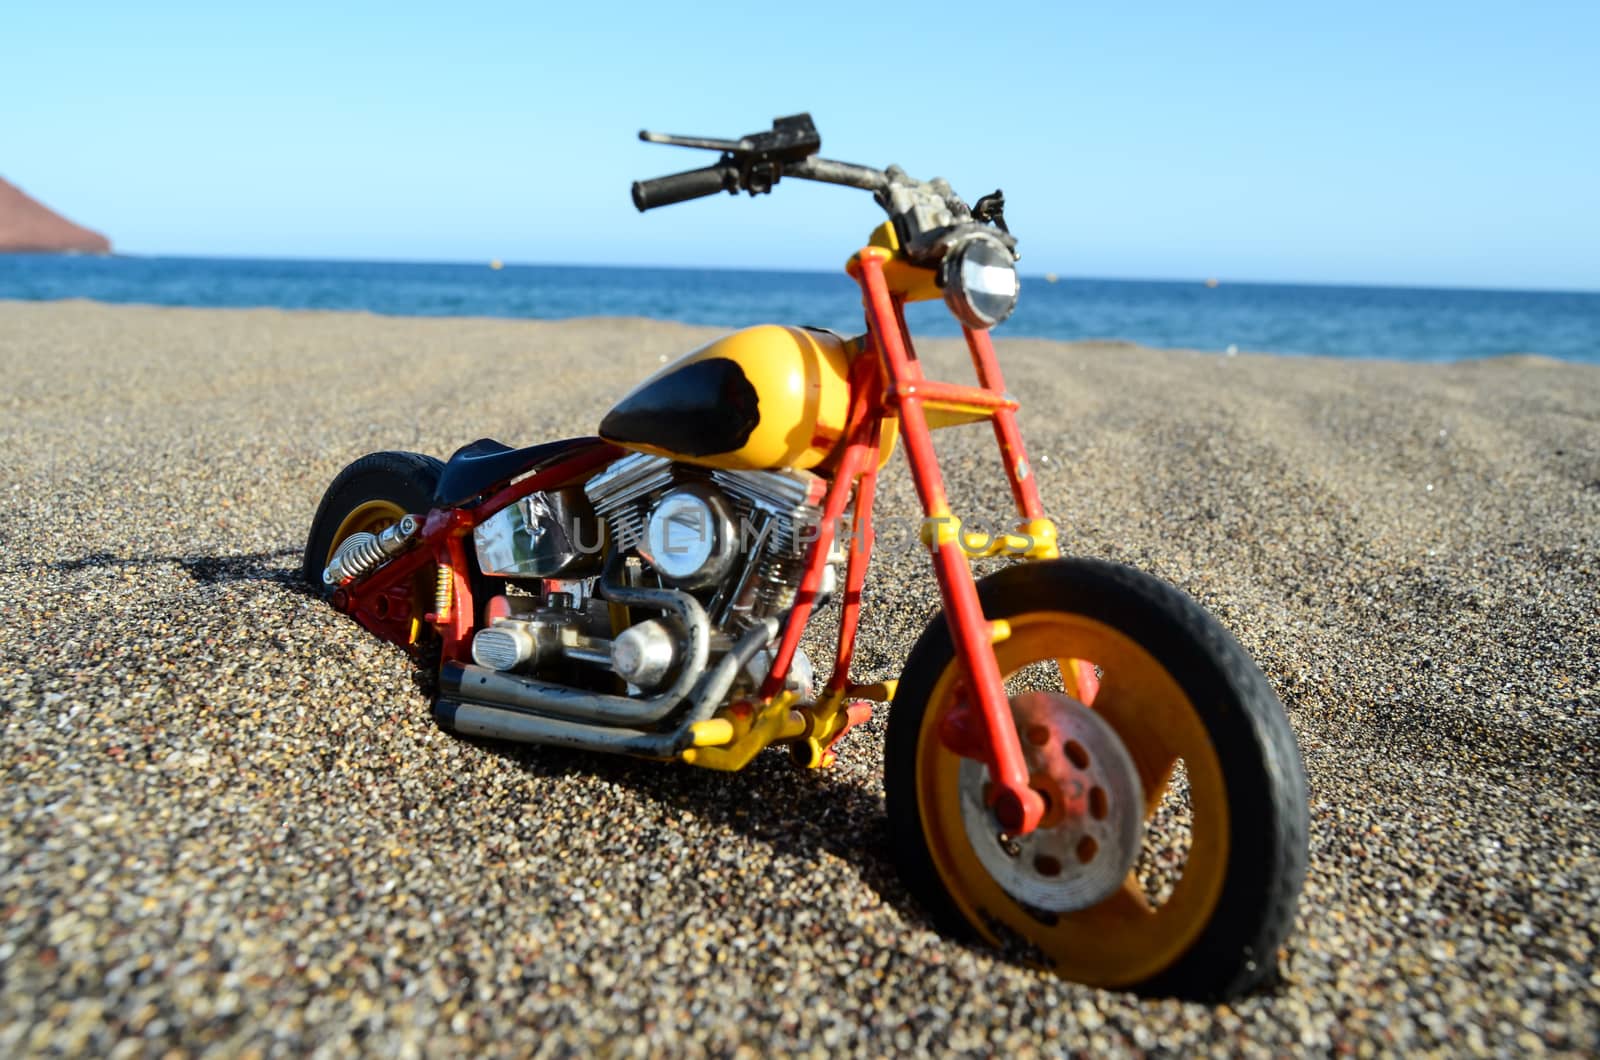 Transportation Concept Toy Motorcycle on the Sand Beach